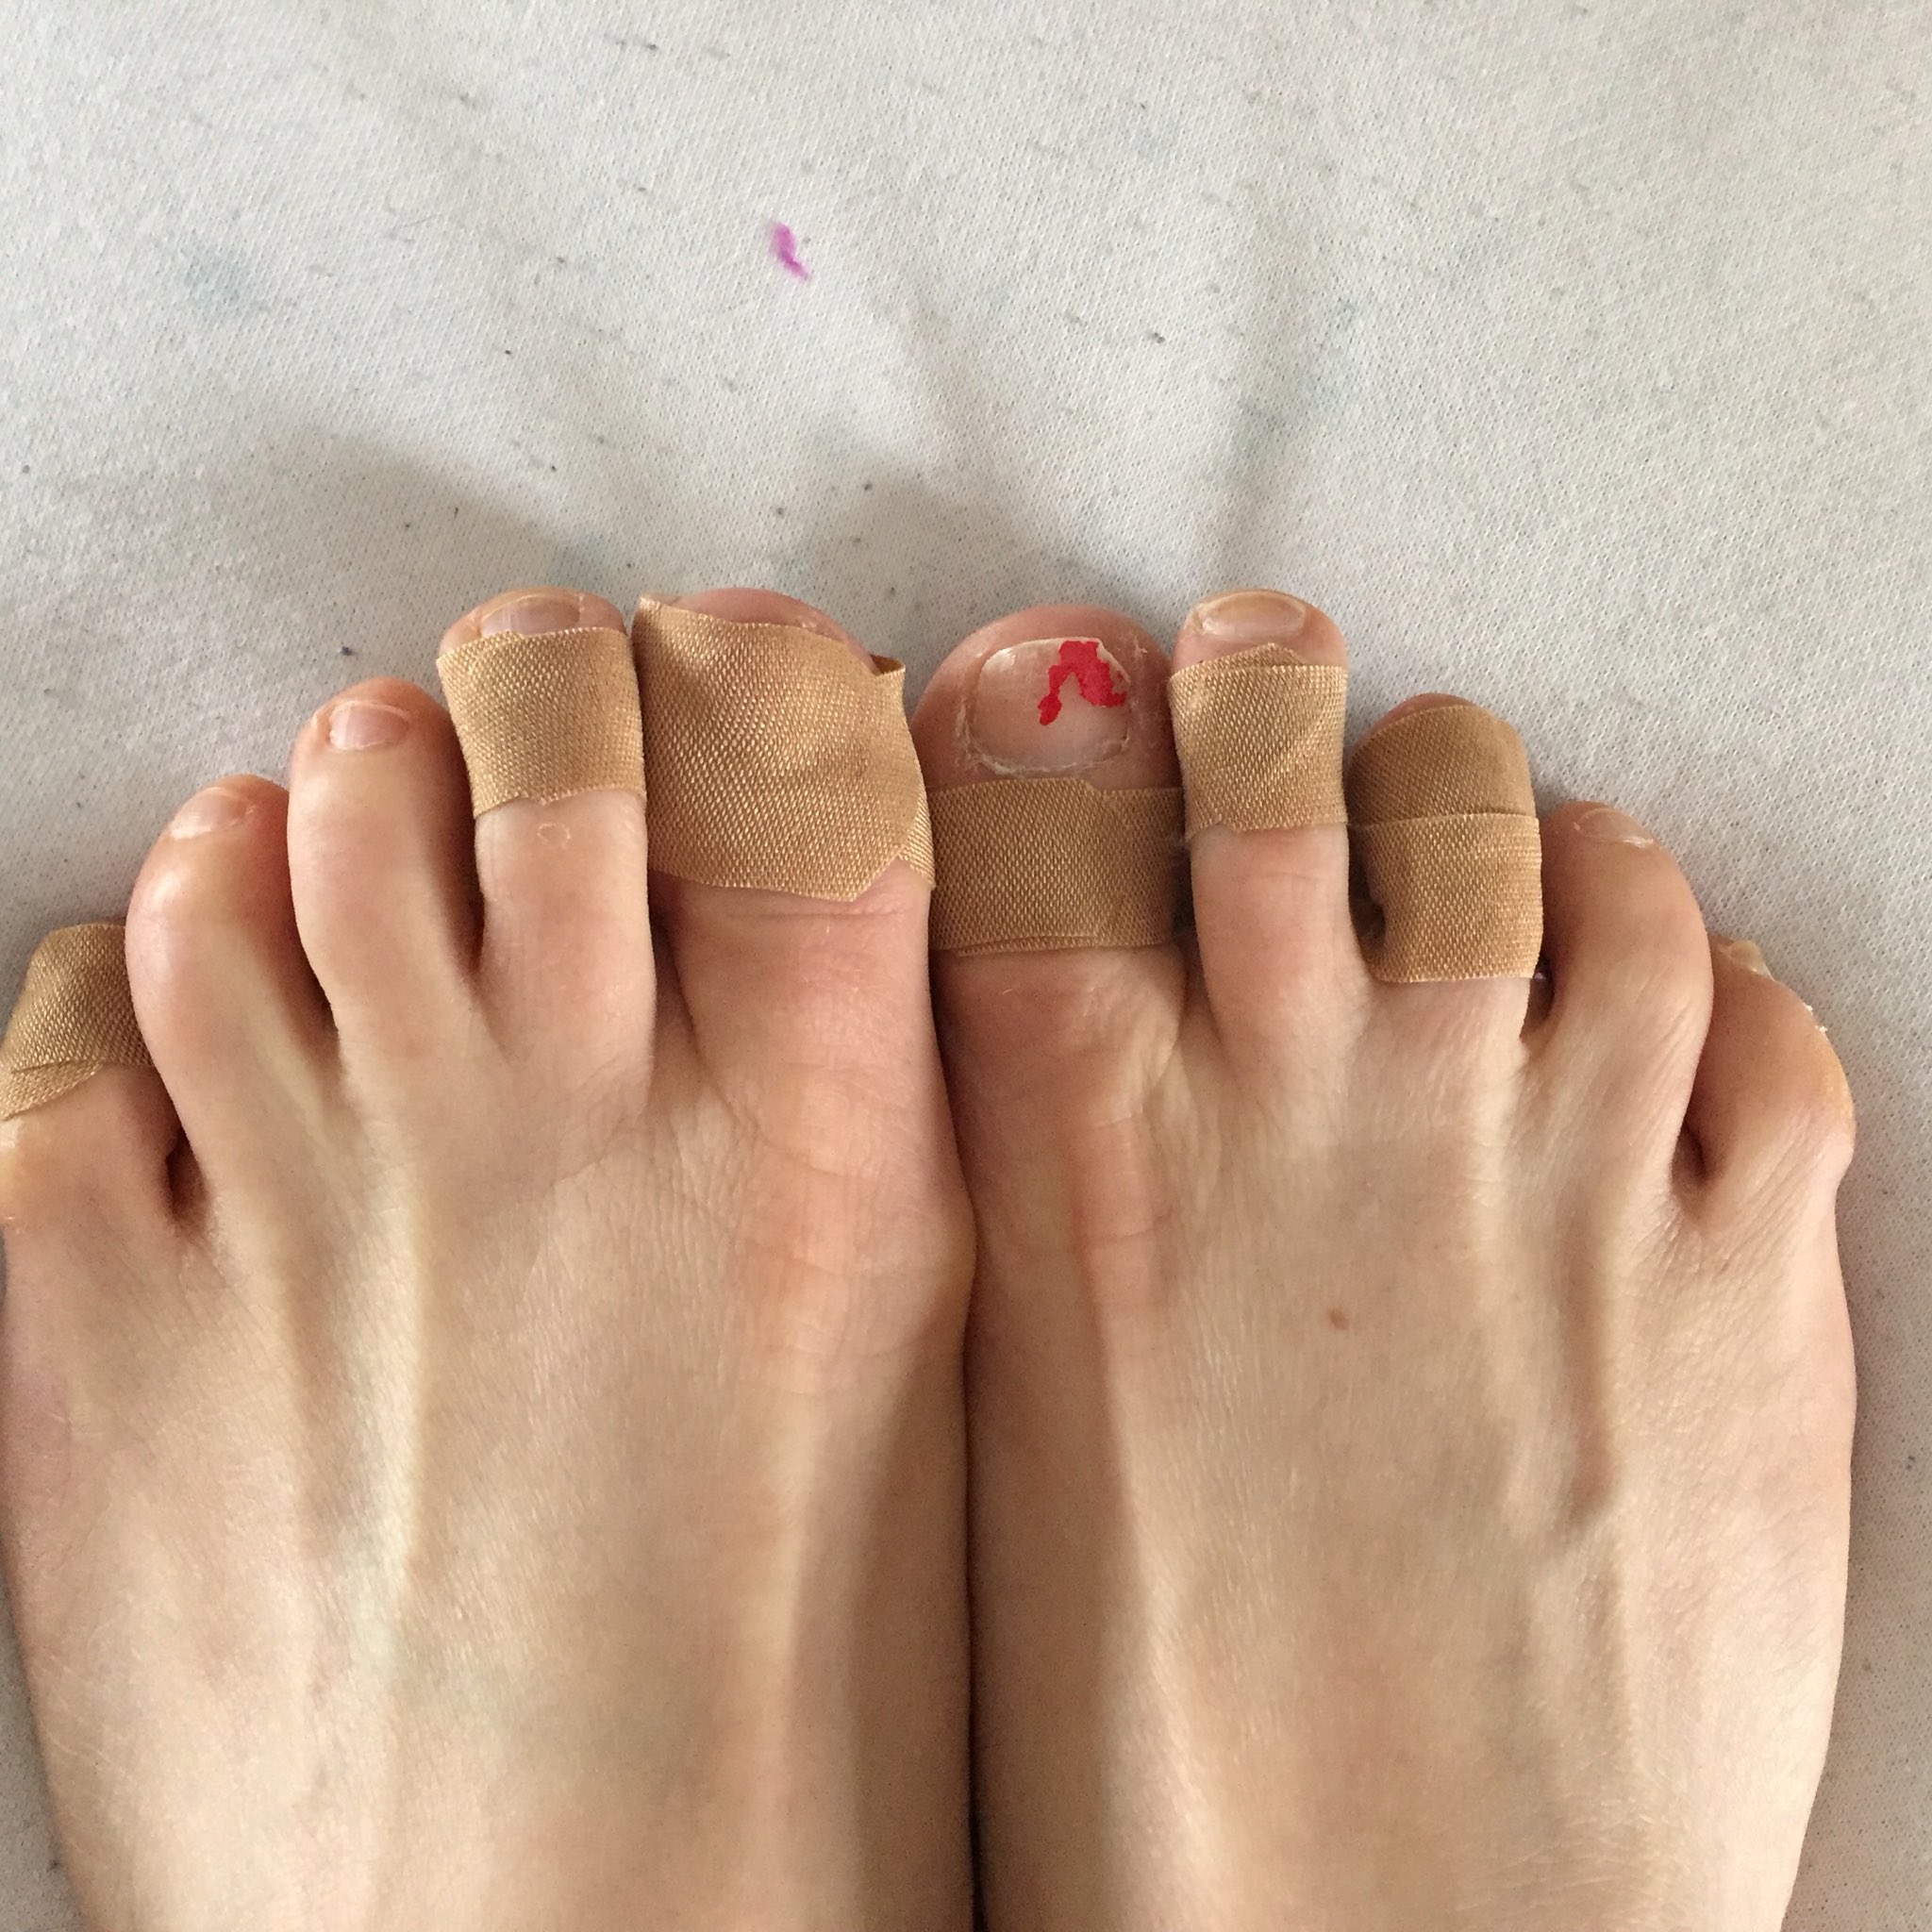 How to Bandage Fingers or Toes: Checking For Breaks + First Aid Tips